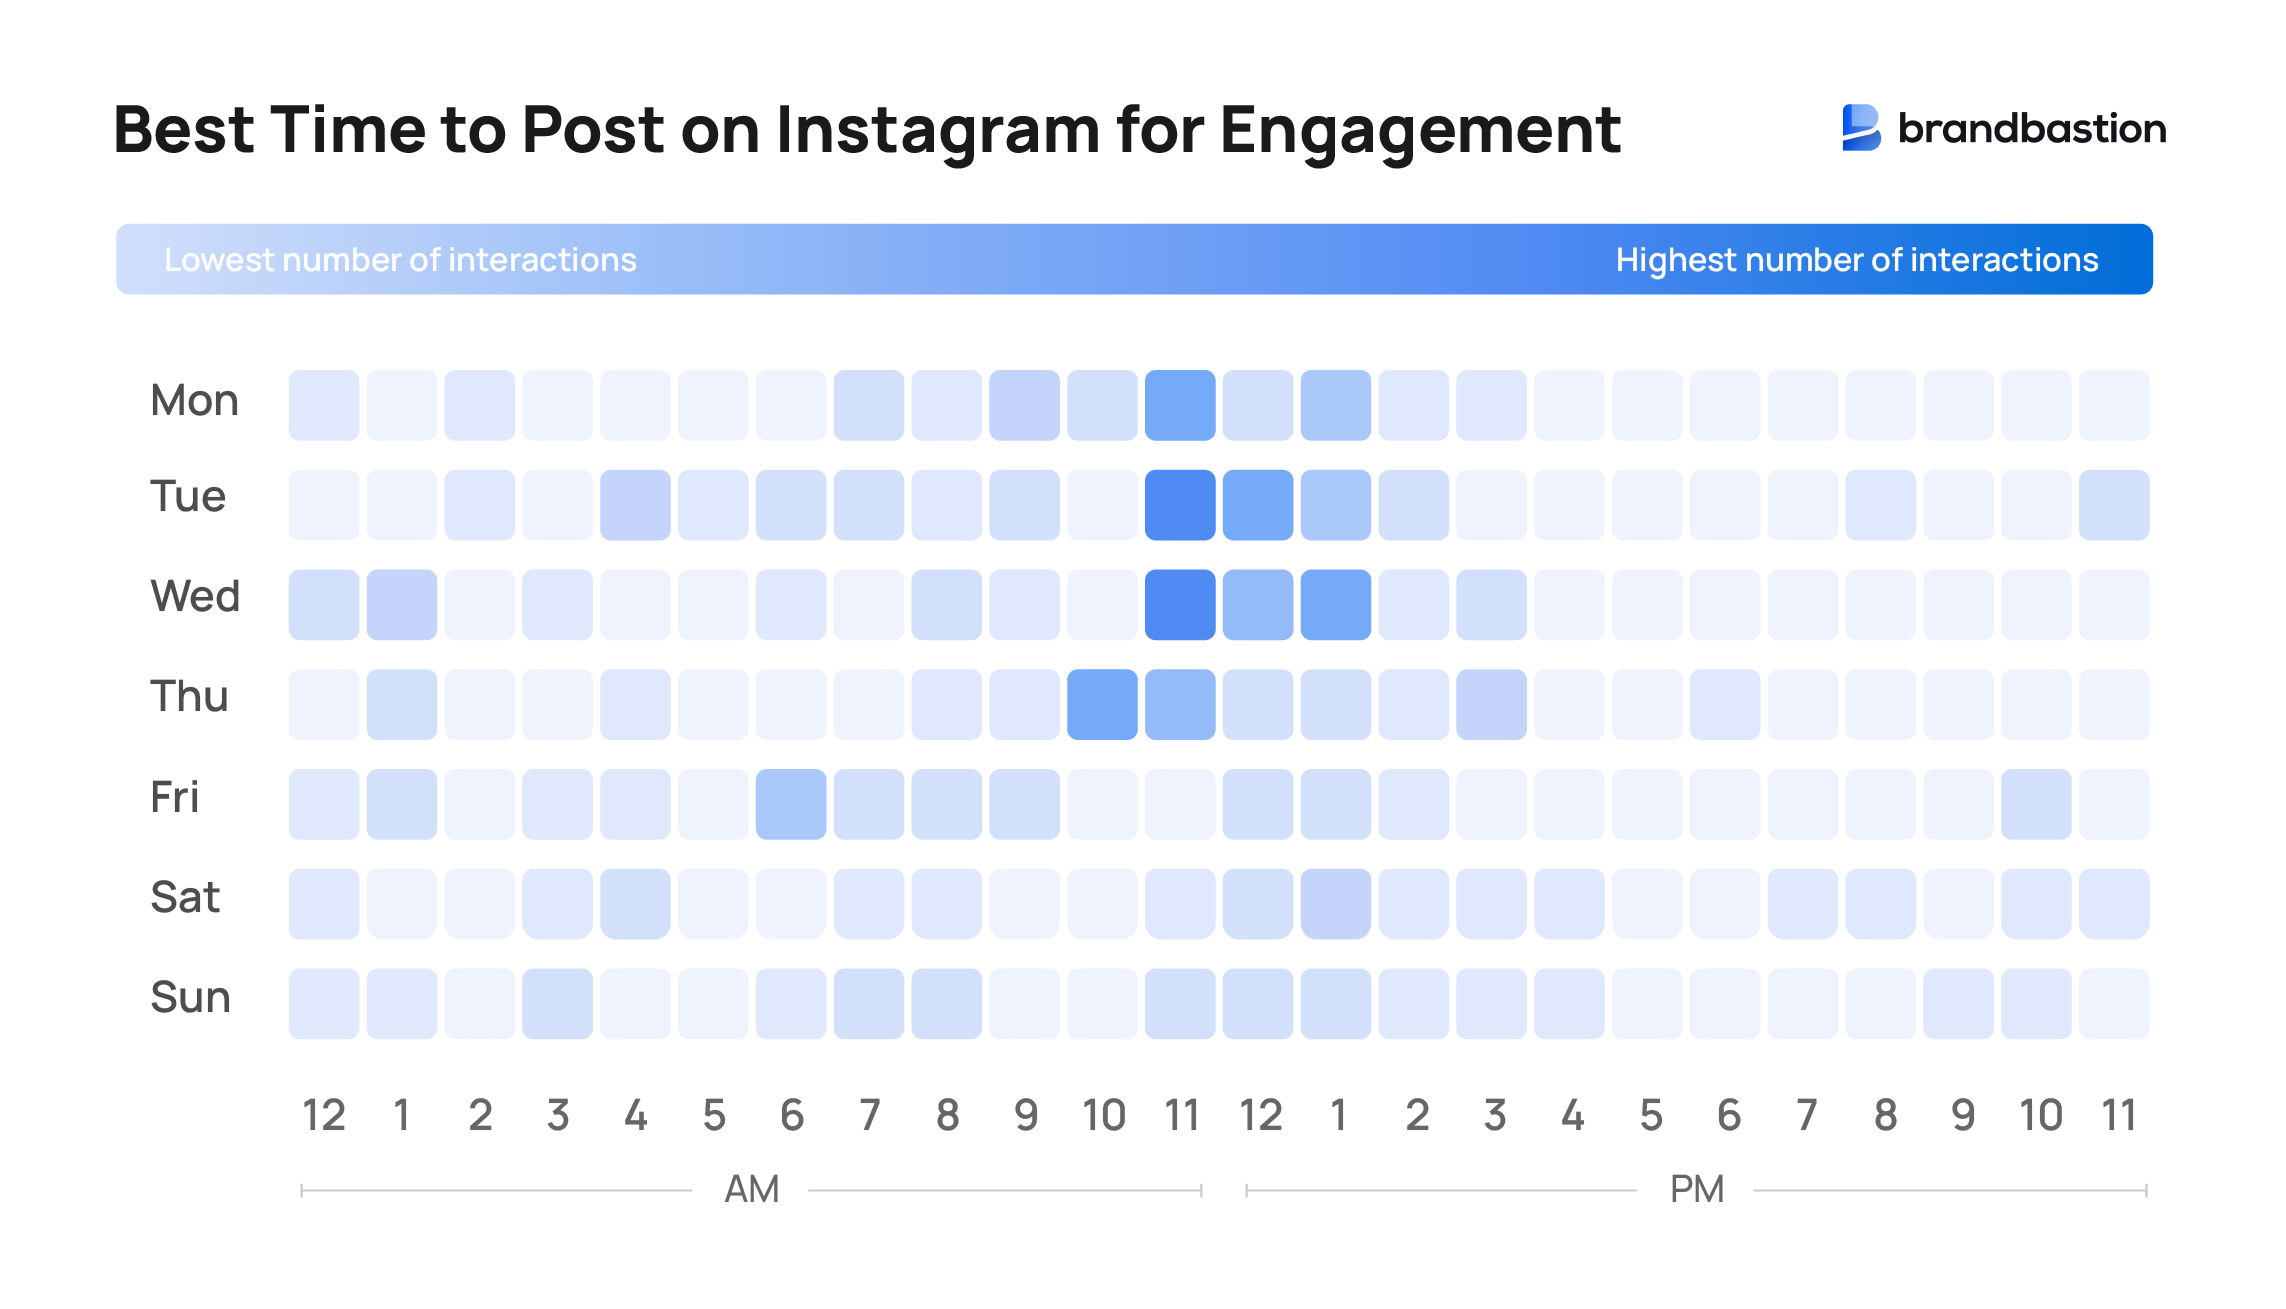 Best times to post on Instagram for engagement